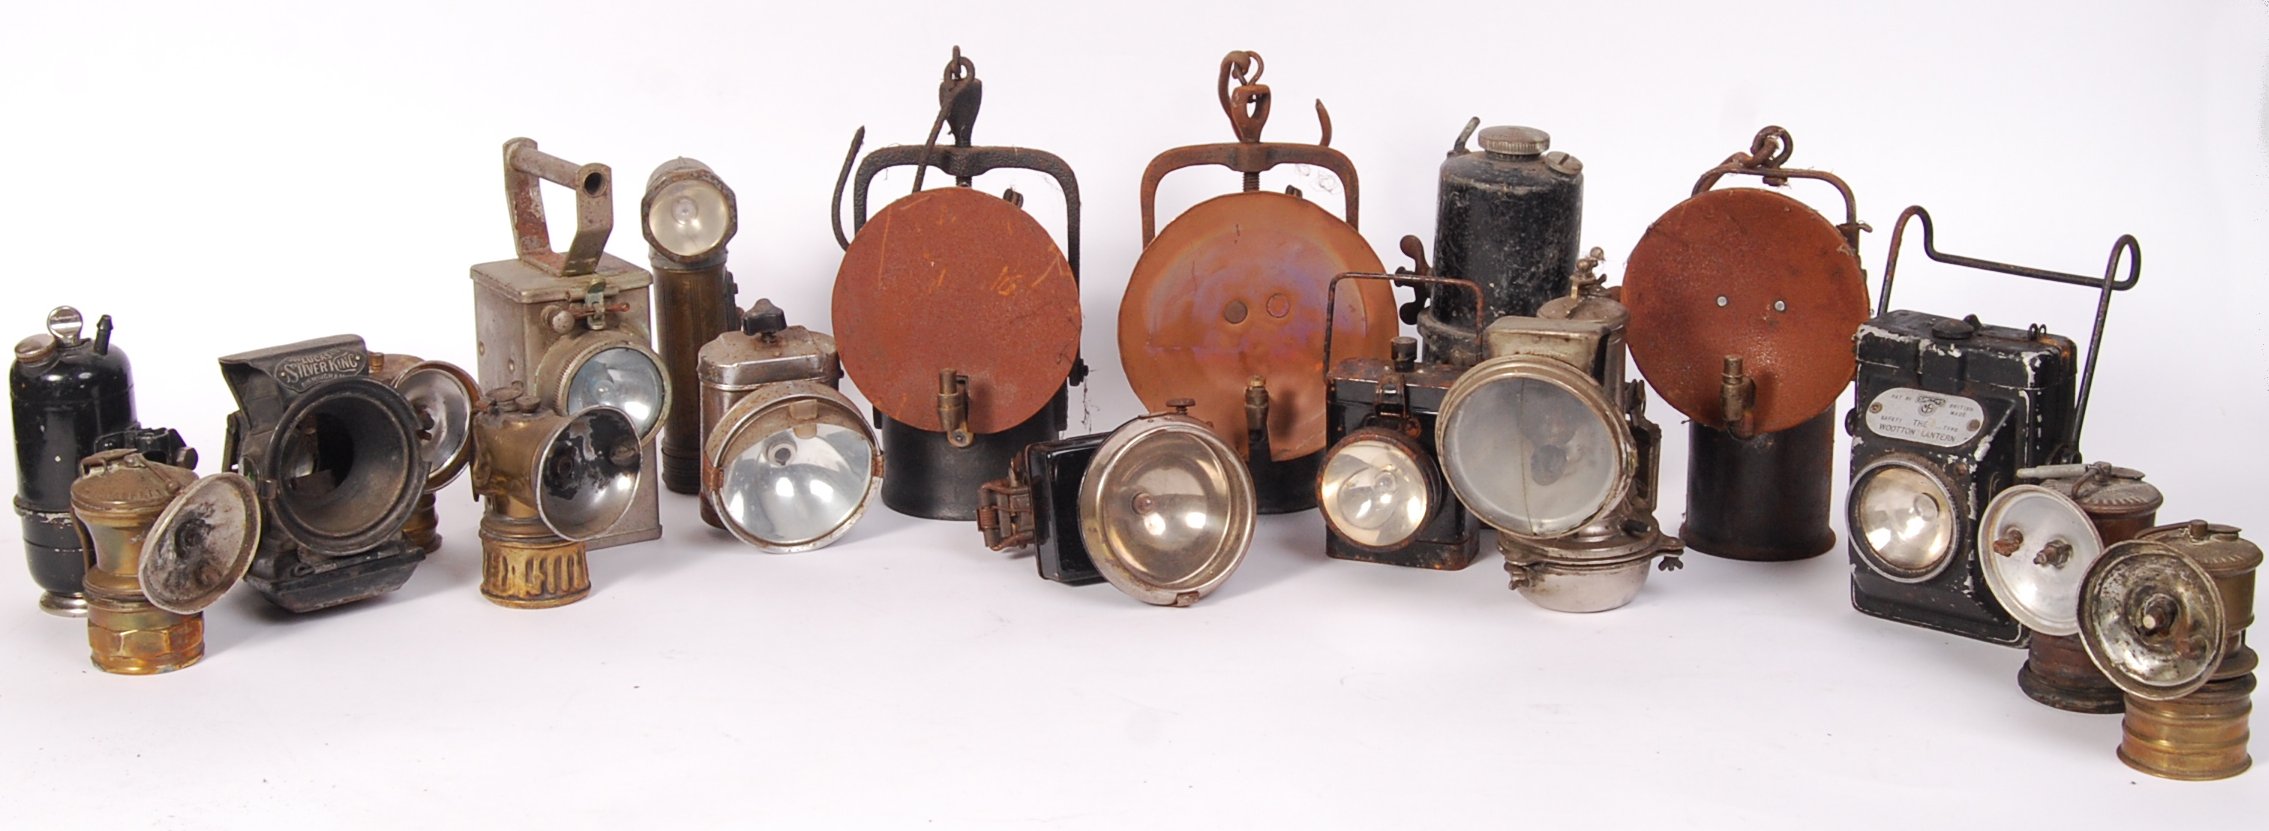 COLLECTION OF ANTIQUE BICYCLE / MOTORCYCLE / SAFETY LAMPS